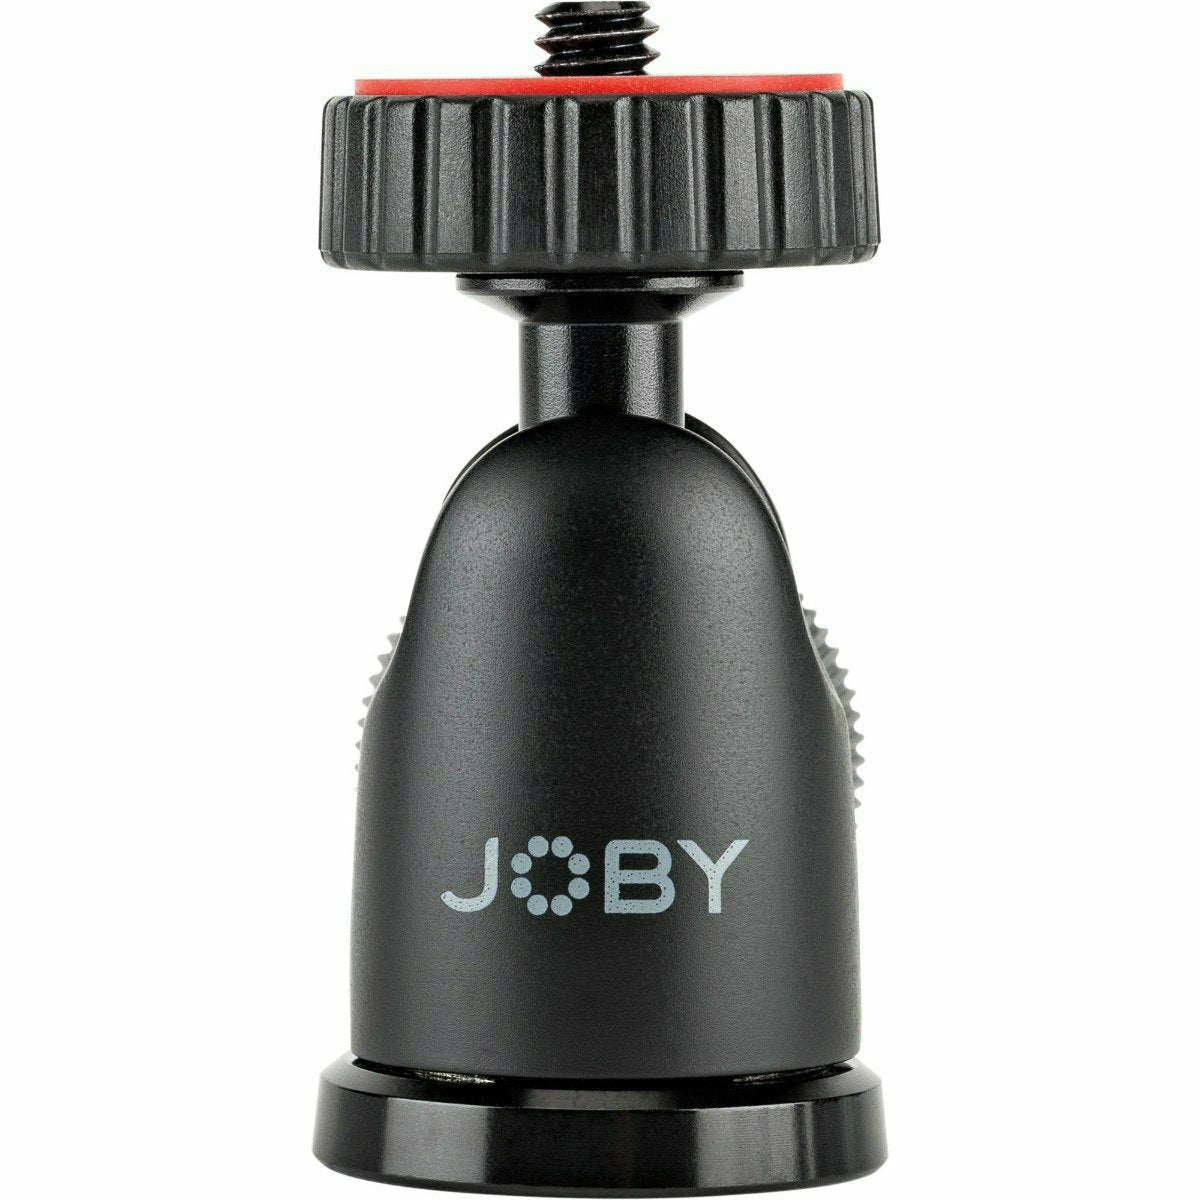 JOBY Head Ball Ik w 1/4in Mount 1Kg Payload Perfect for GorillaPod 1K - Dragon Image